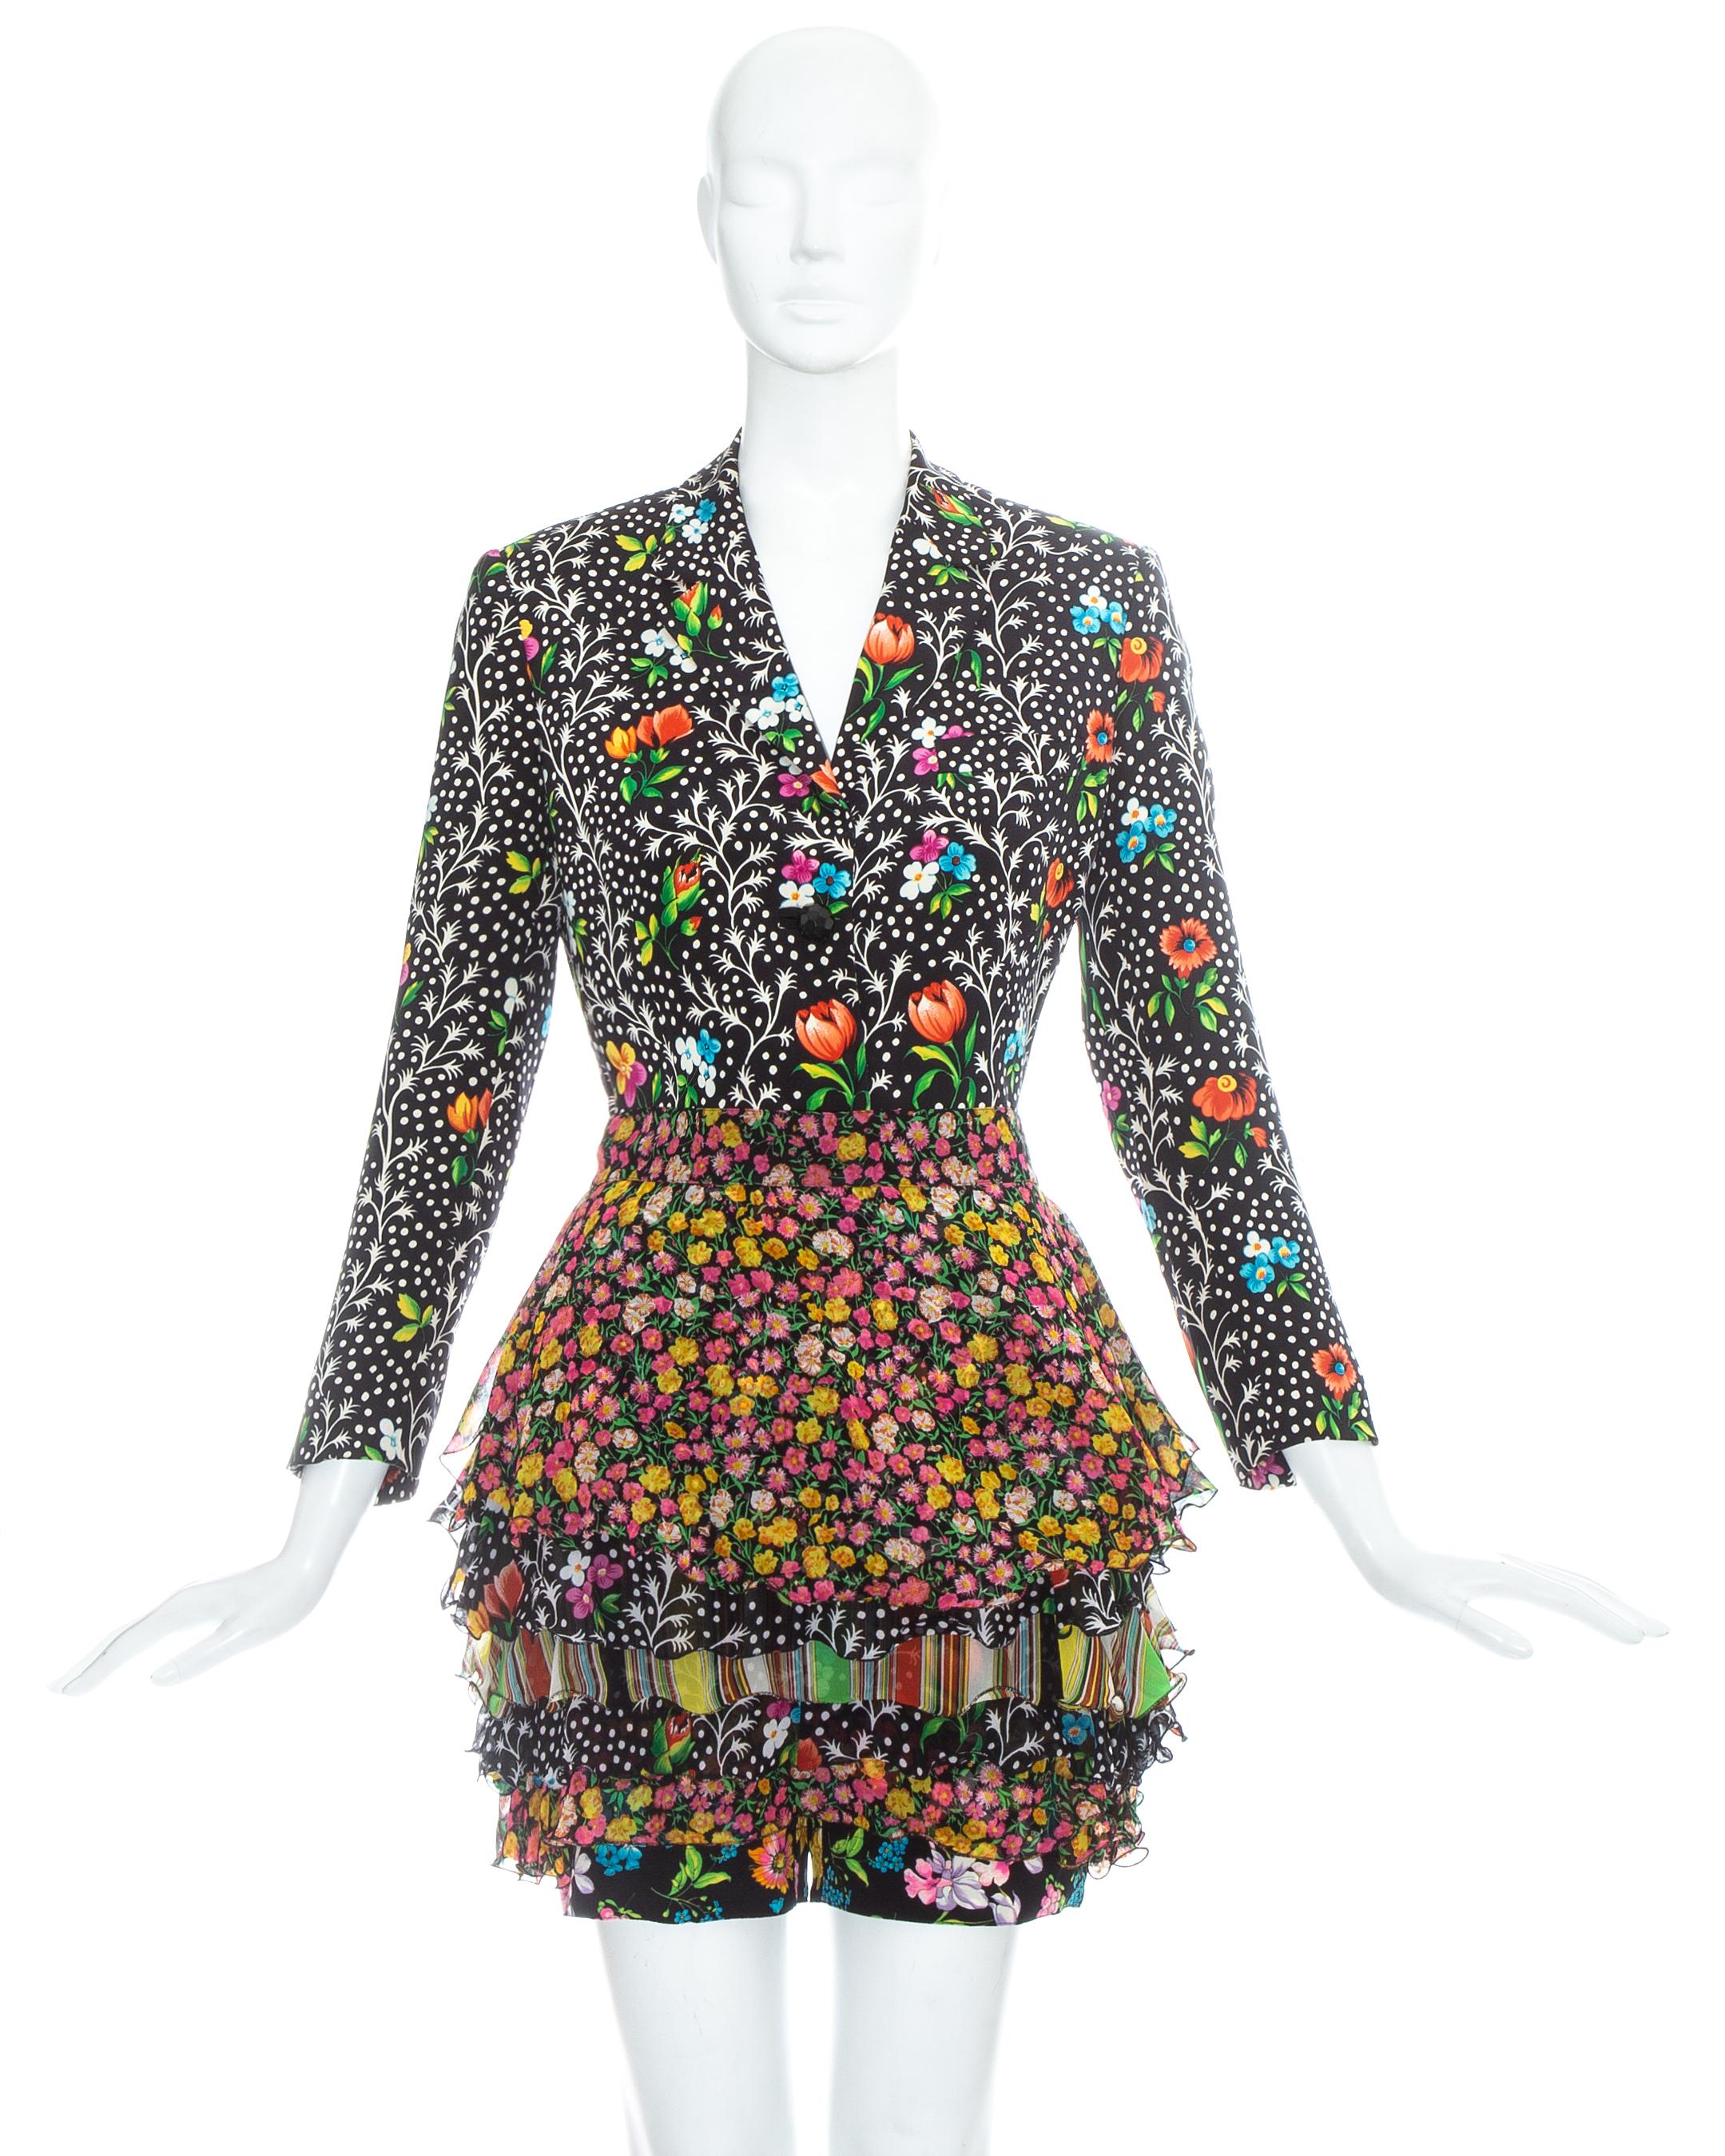 Gianni Versace silk floral printed blazer and shorts ensemble. Lightweight blazer jacket. High waisted mini shorts with layers of silk.

Spring-Summer 1993